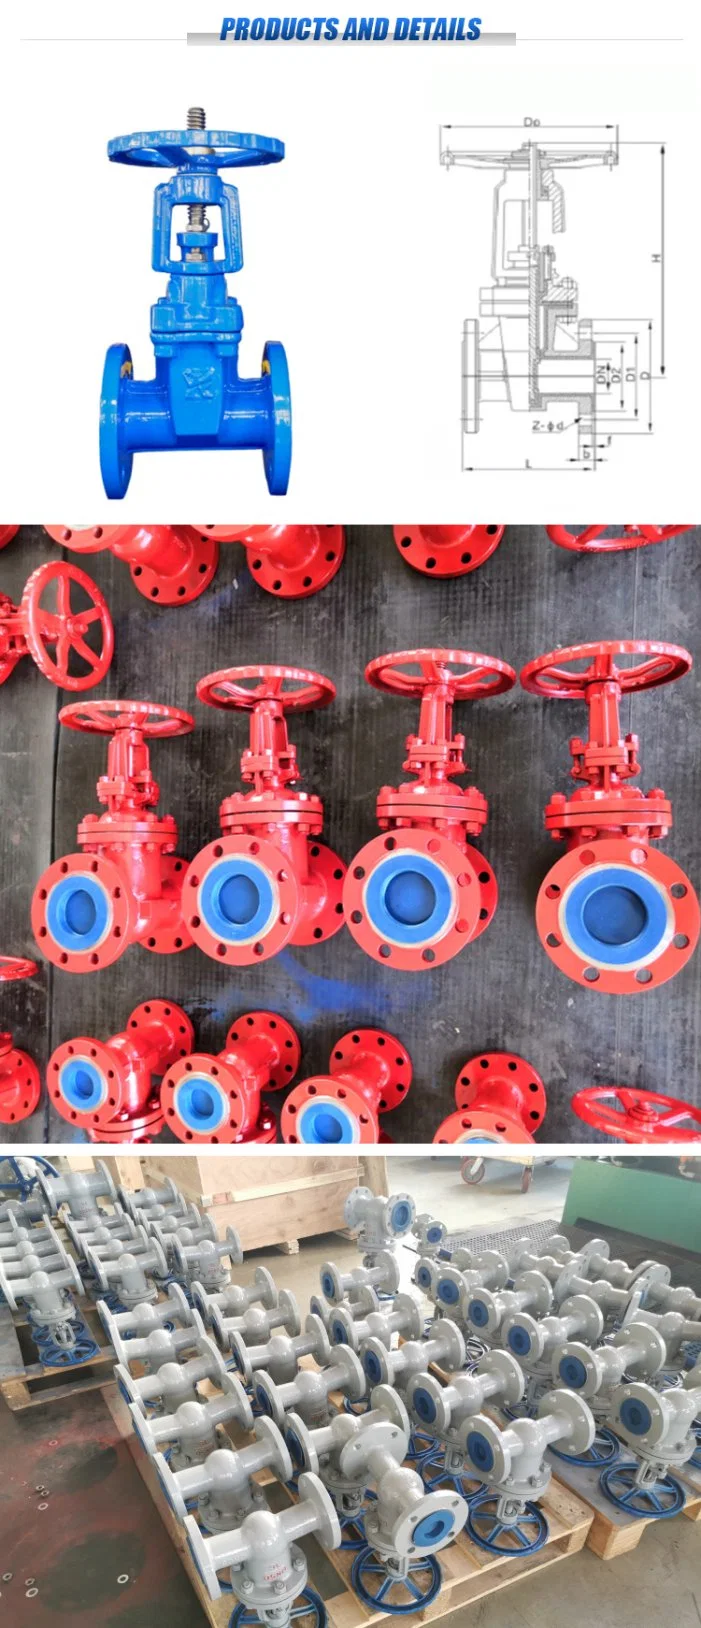 API 600 Cast Iron Resilient Seated Wedge Motorized Gate Valve for Water